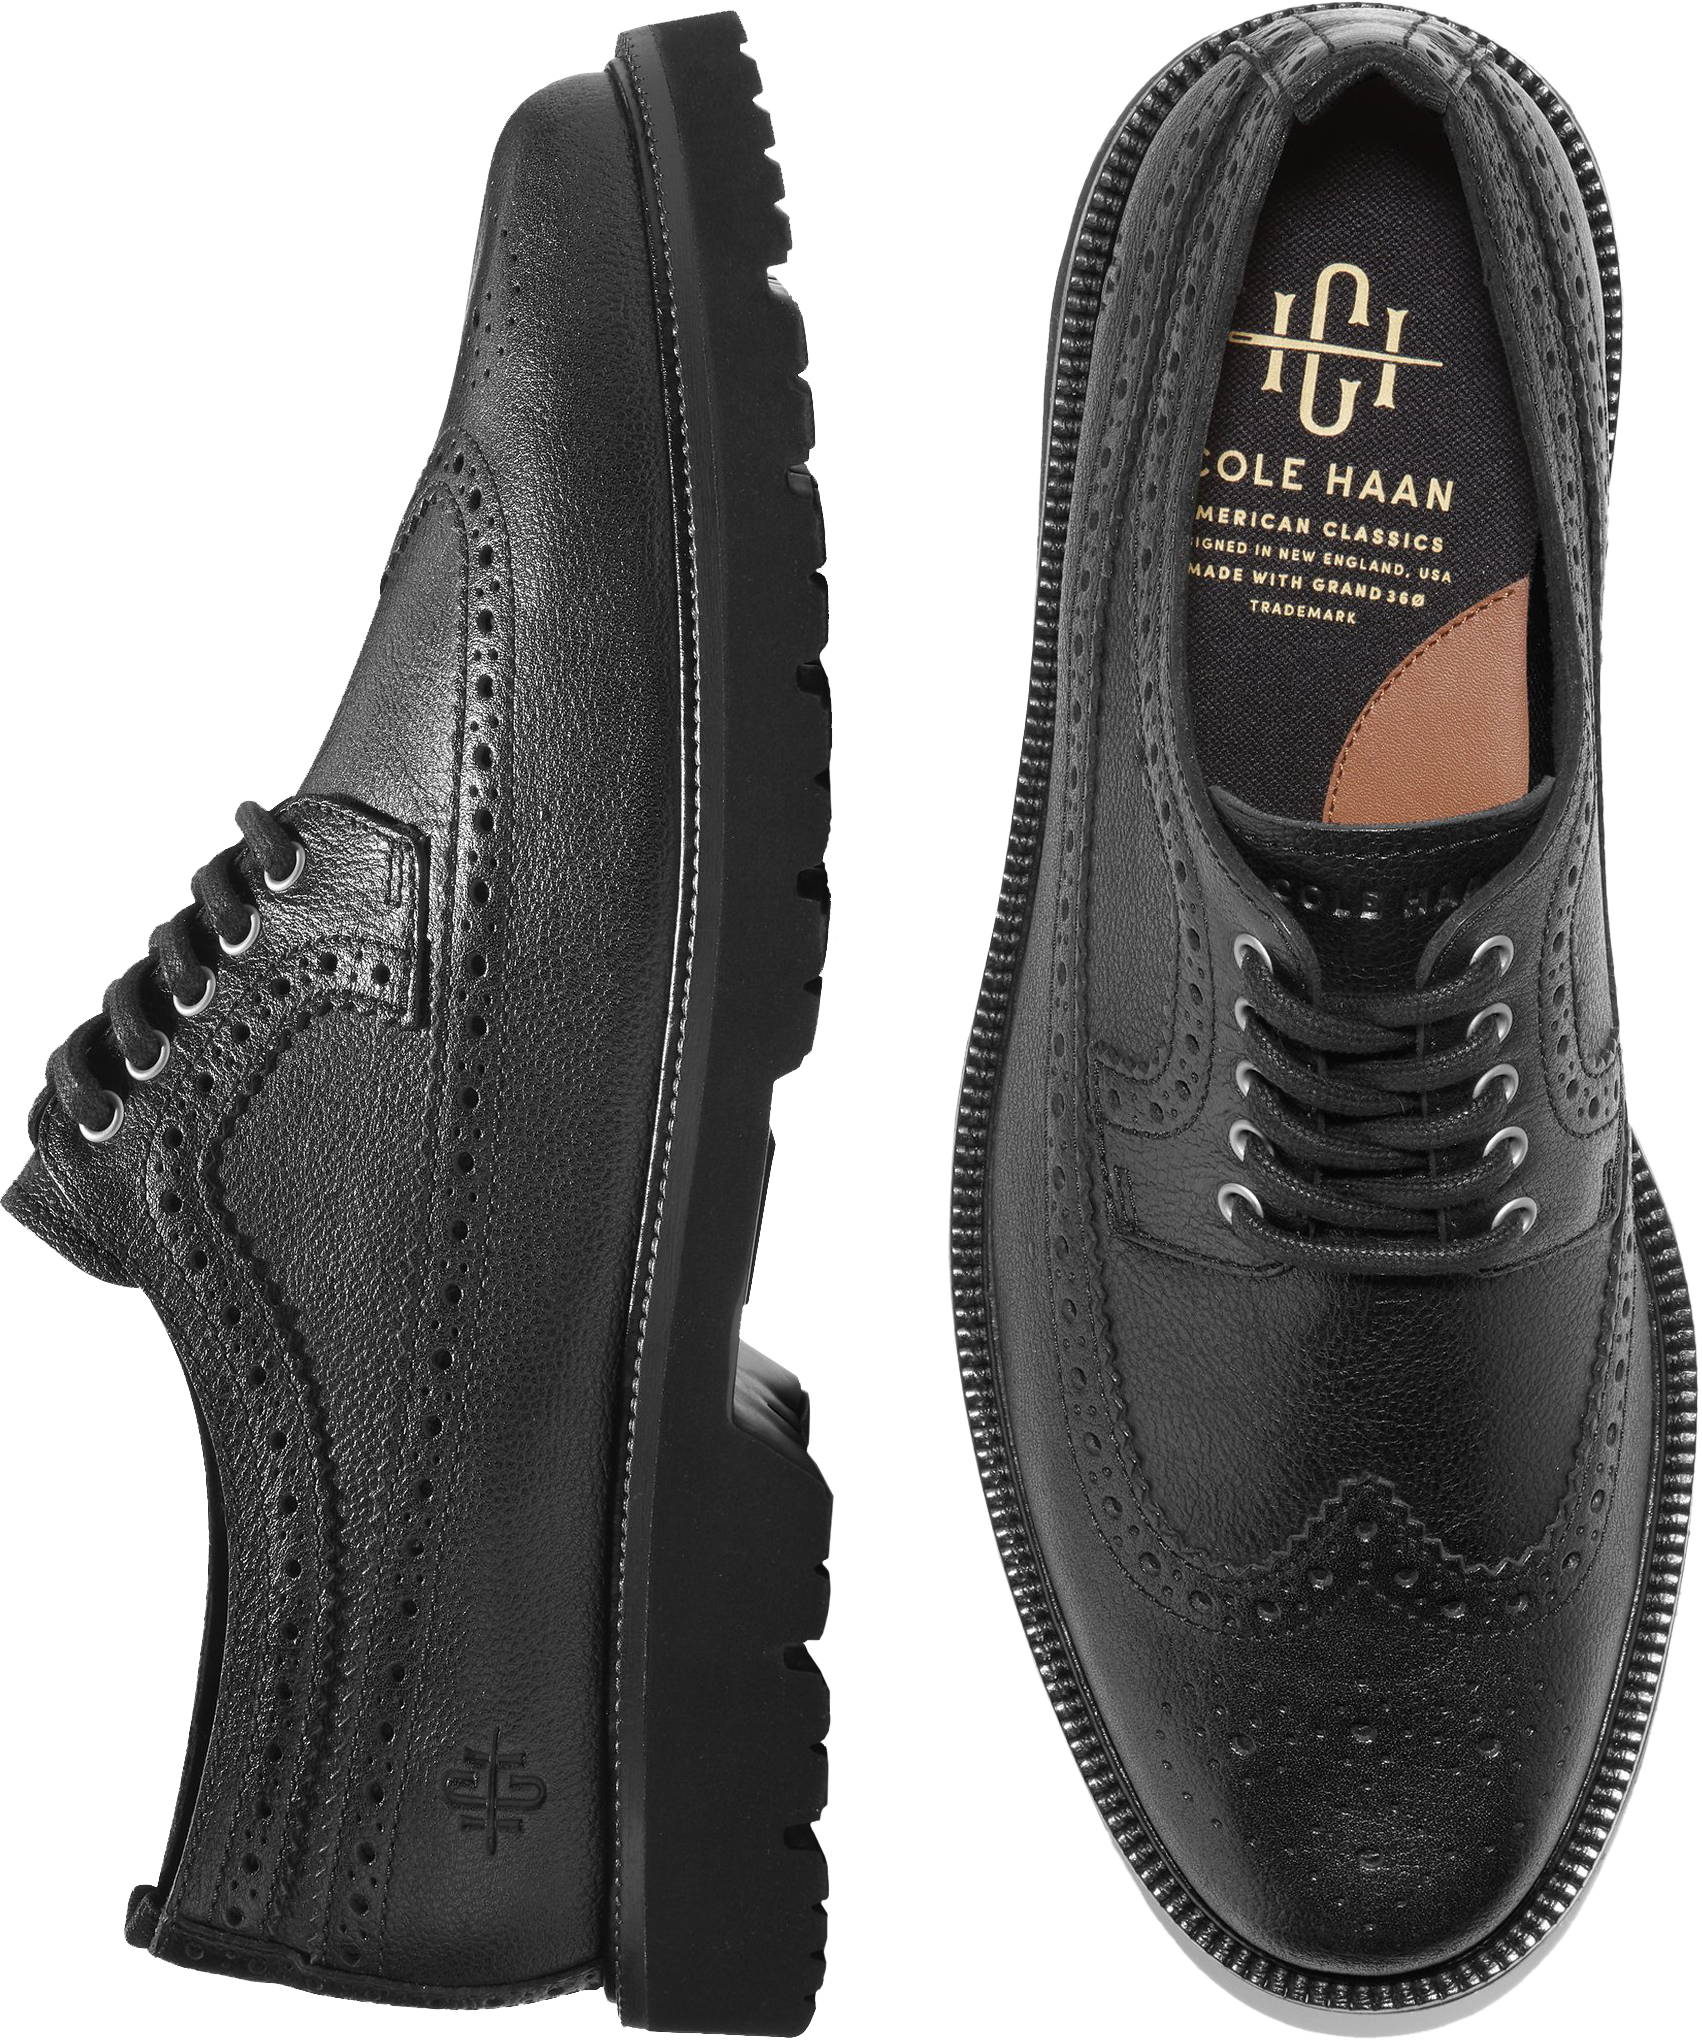 Cole Haan American Classics Longwing Oxfords | Casual Shoes| Men's